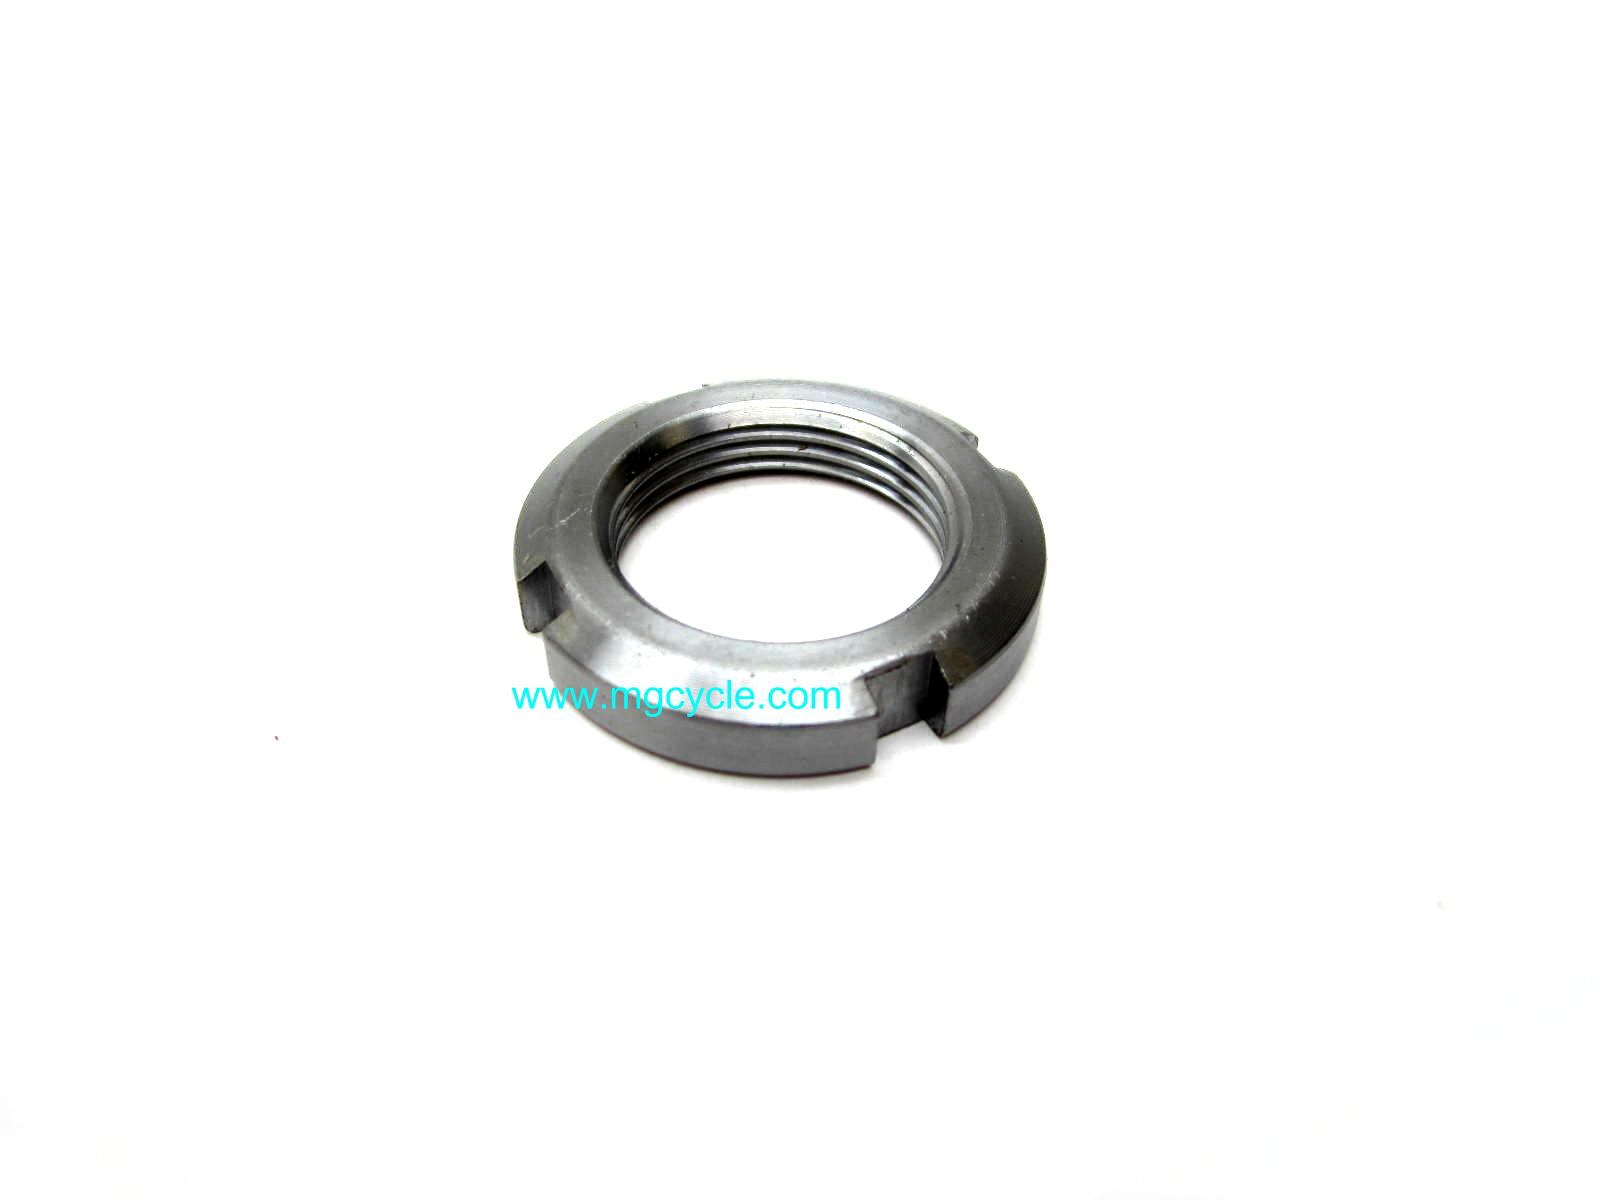 Ring nut for crankshaft, final drive, steering head, clutch hub - Click Image to Close